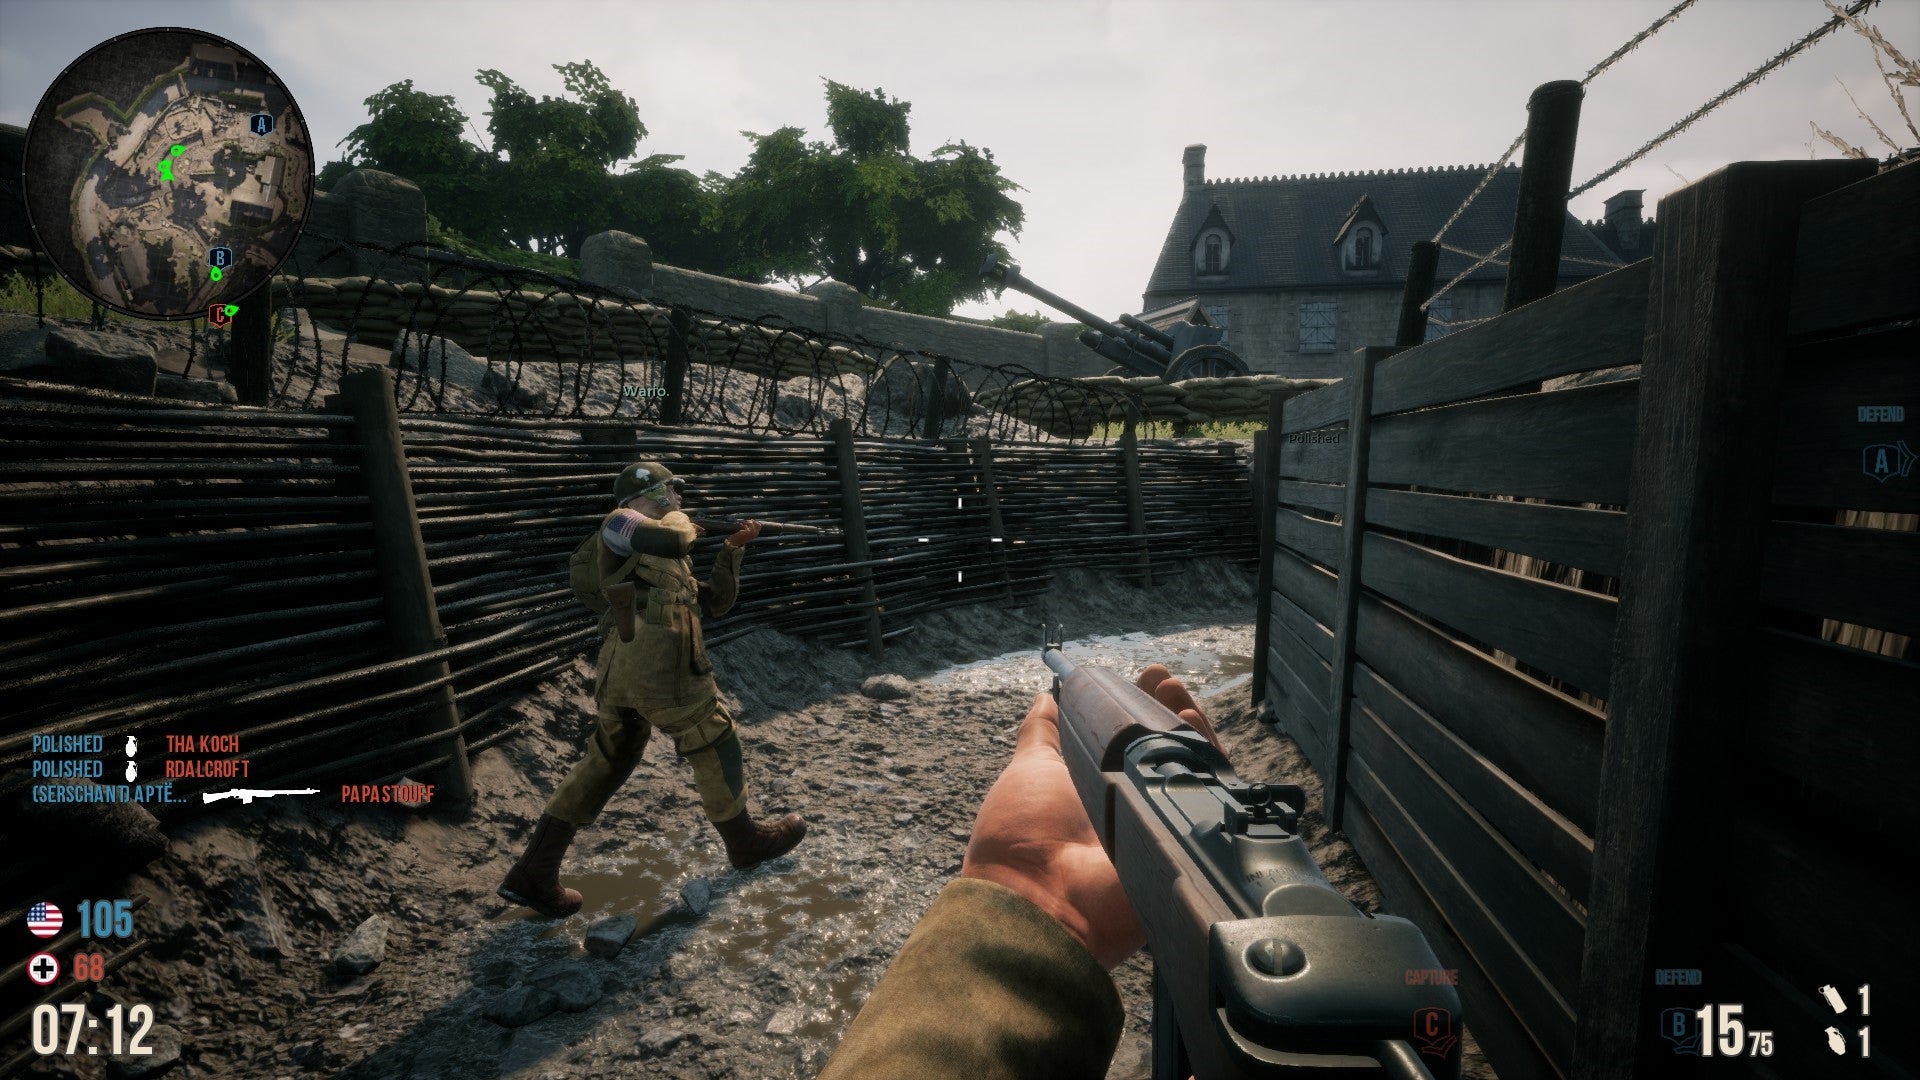 First-person view in a Battalion 1944 game match.